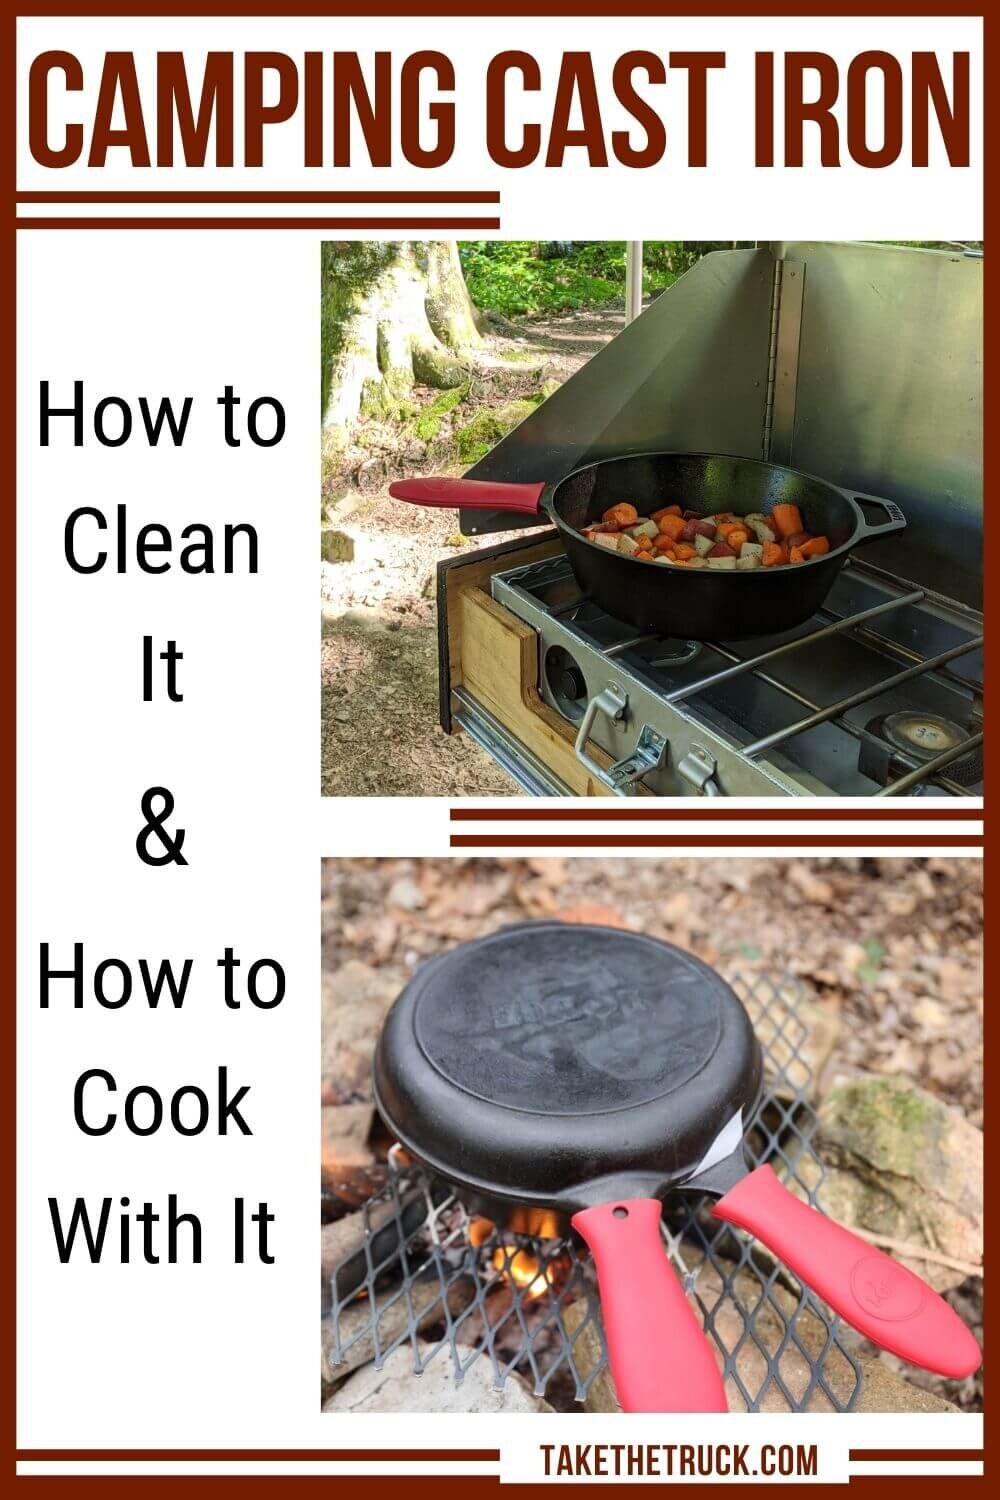 7 Steps To Season Your Cast Iron Skillet - Camping World Blog